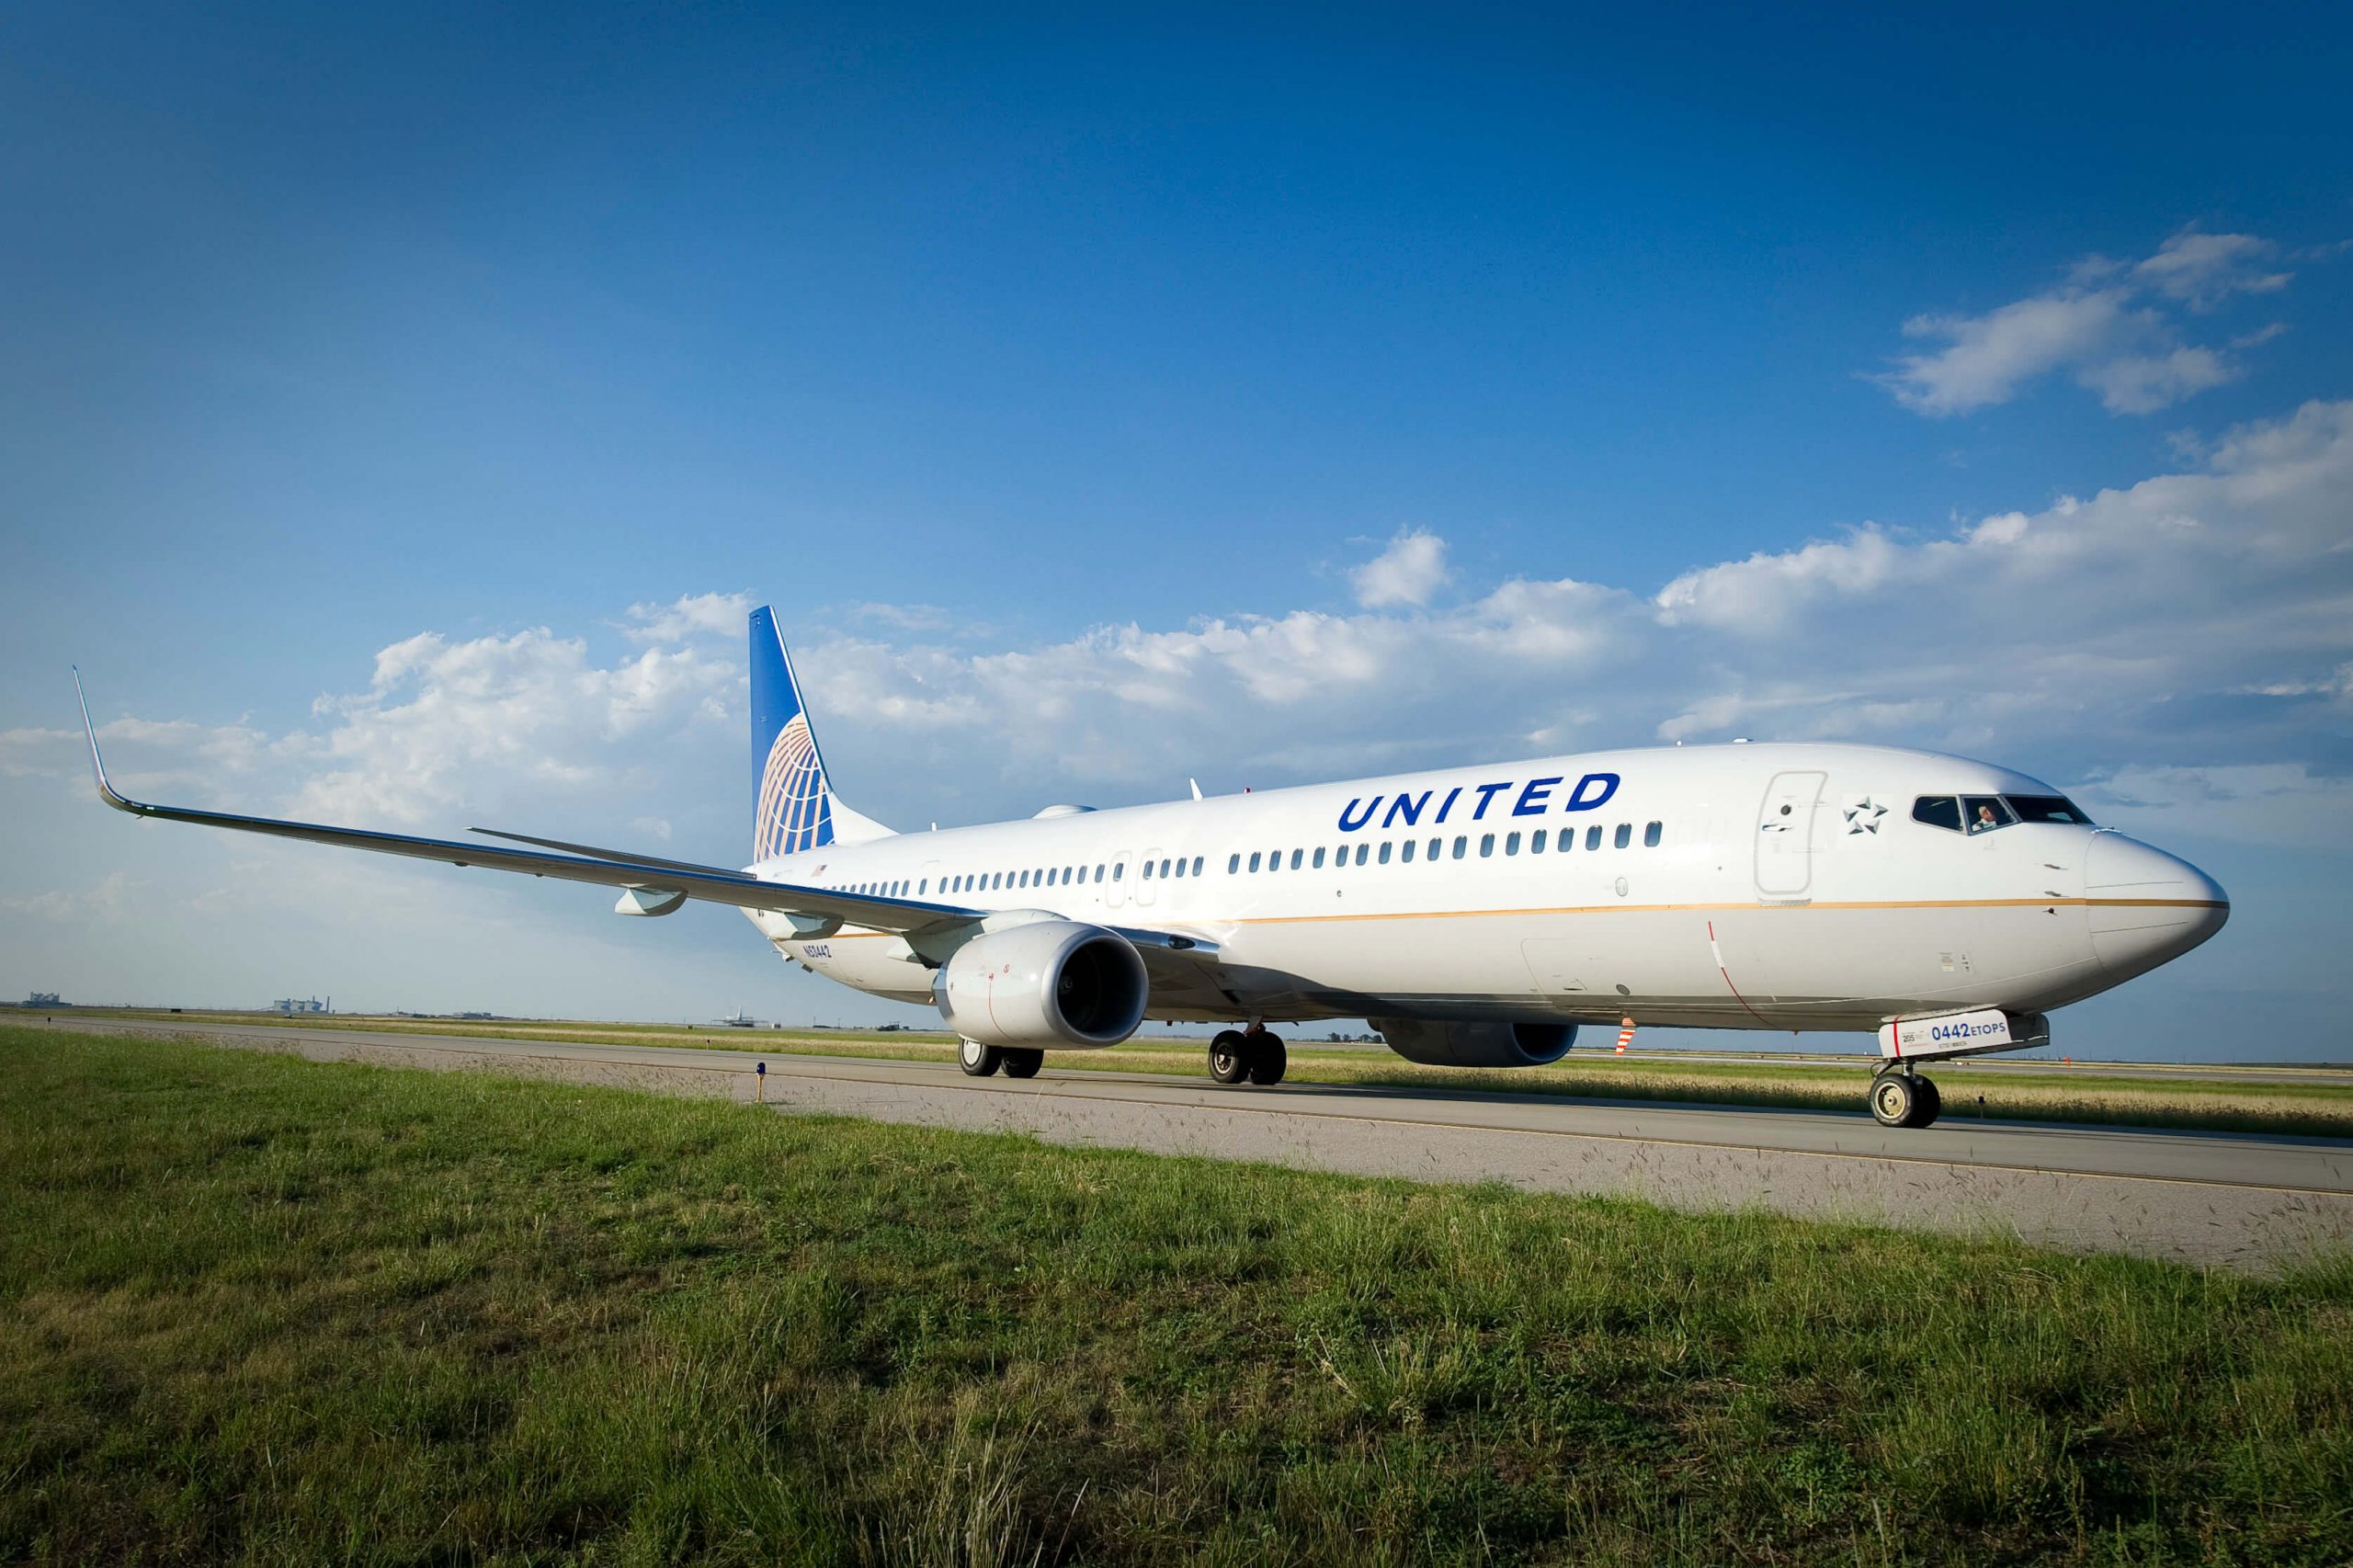 United to fly nonstop between Washington D.C. and Cape Town